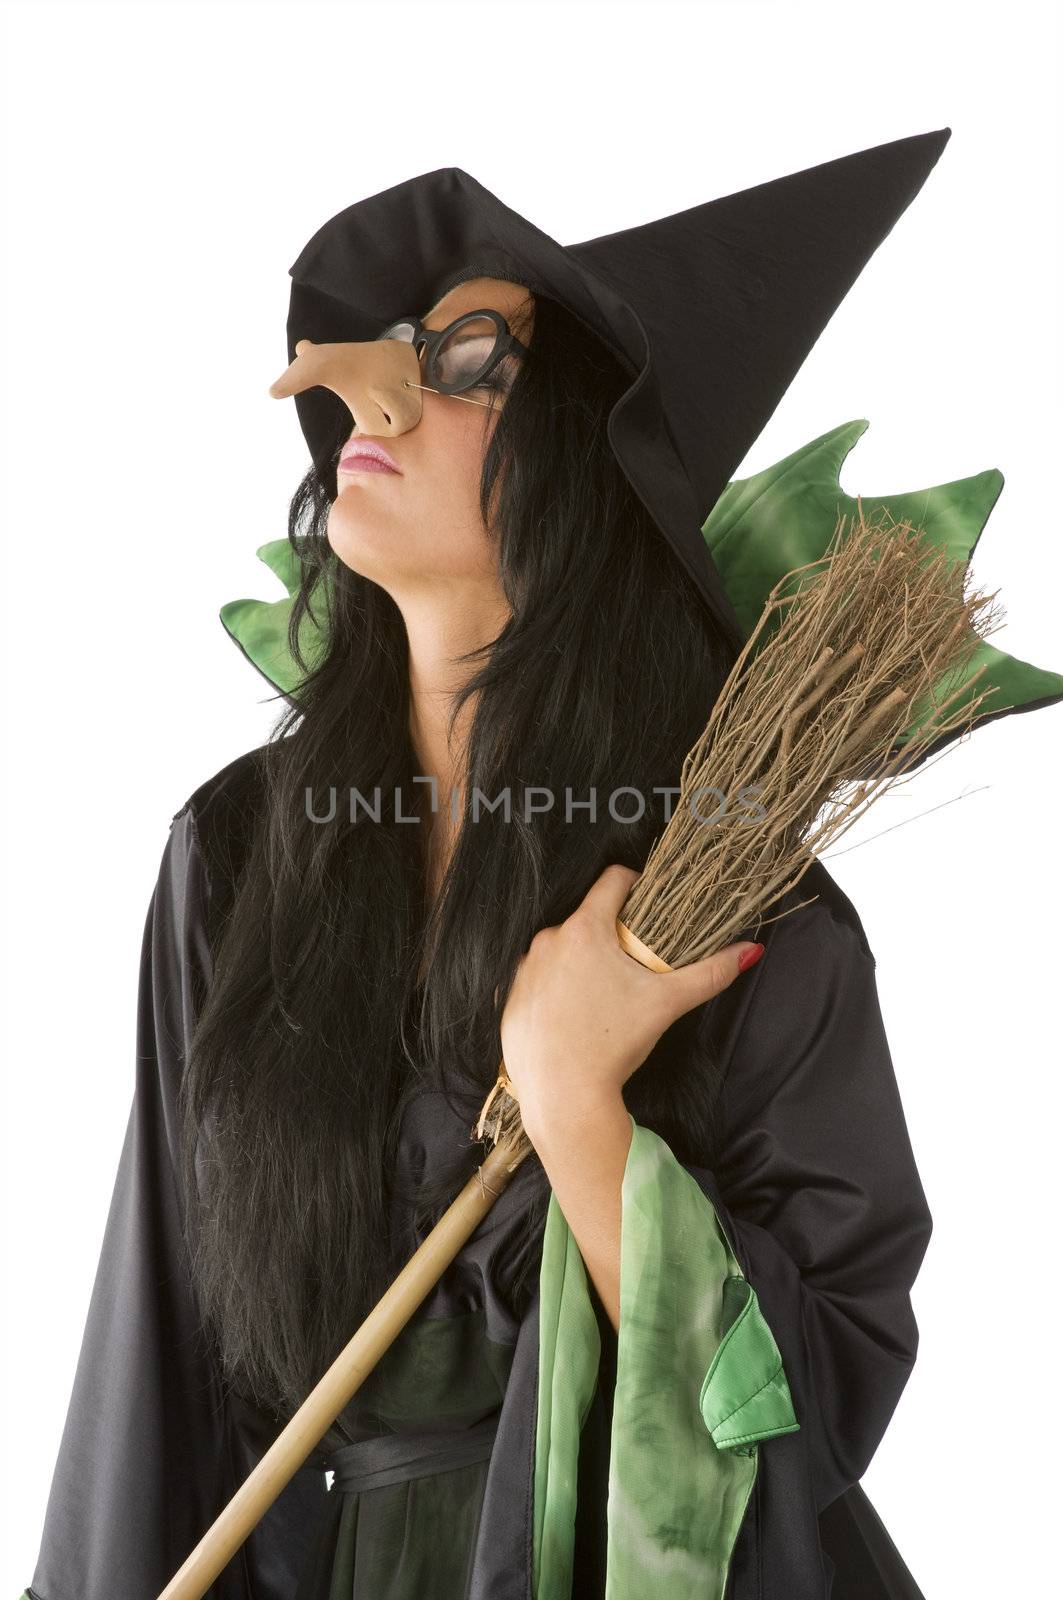 profile of old ugly witch with big nose and glasses arming a broom